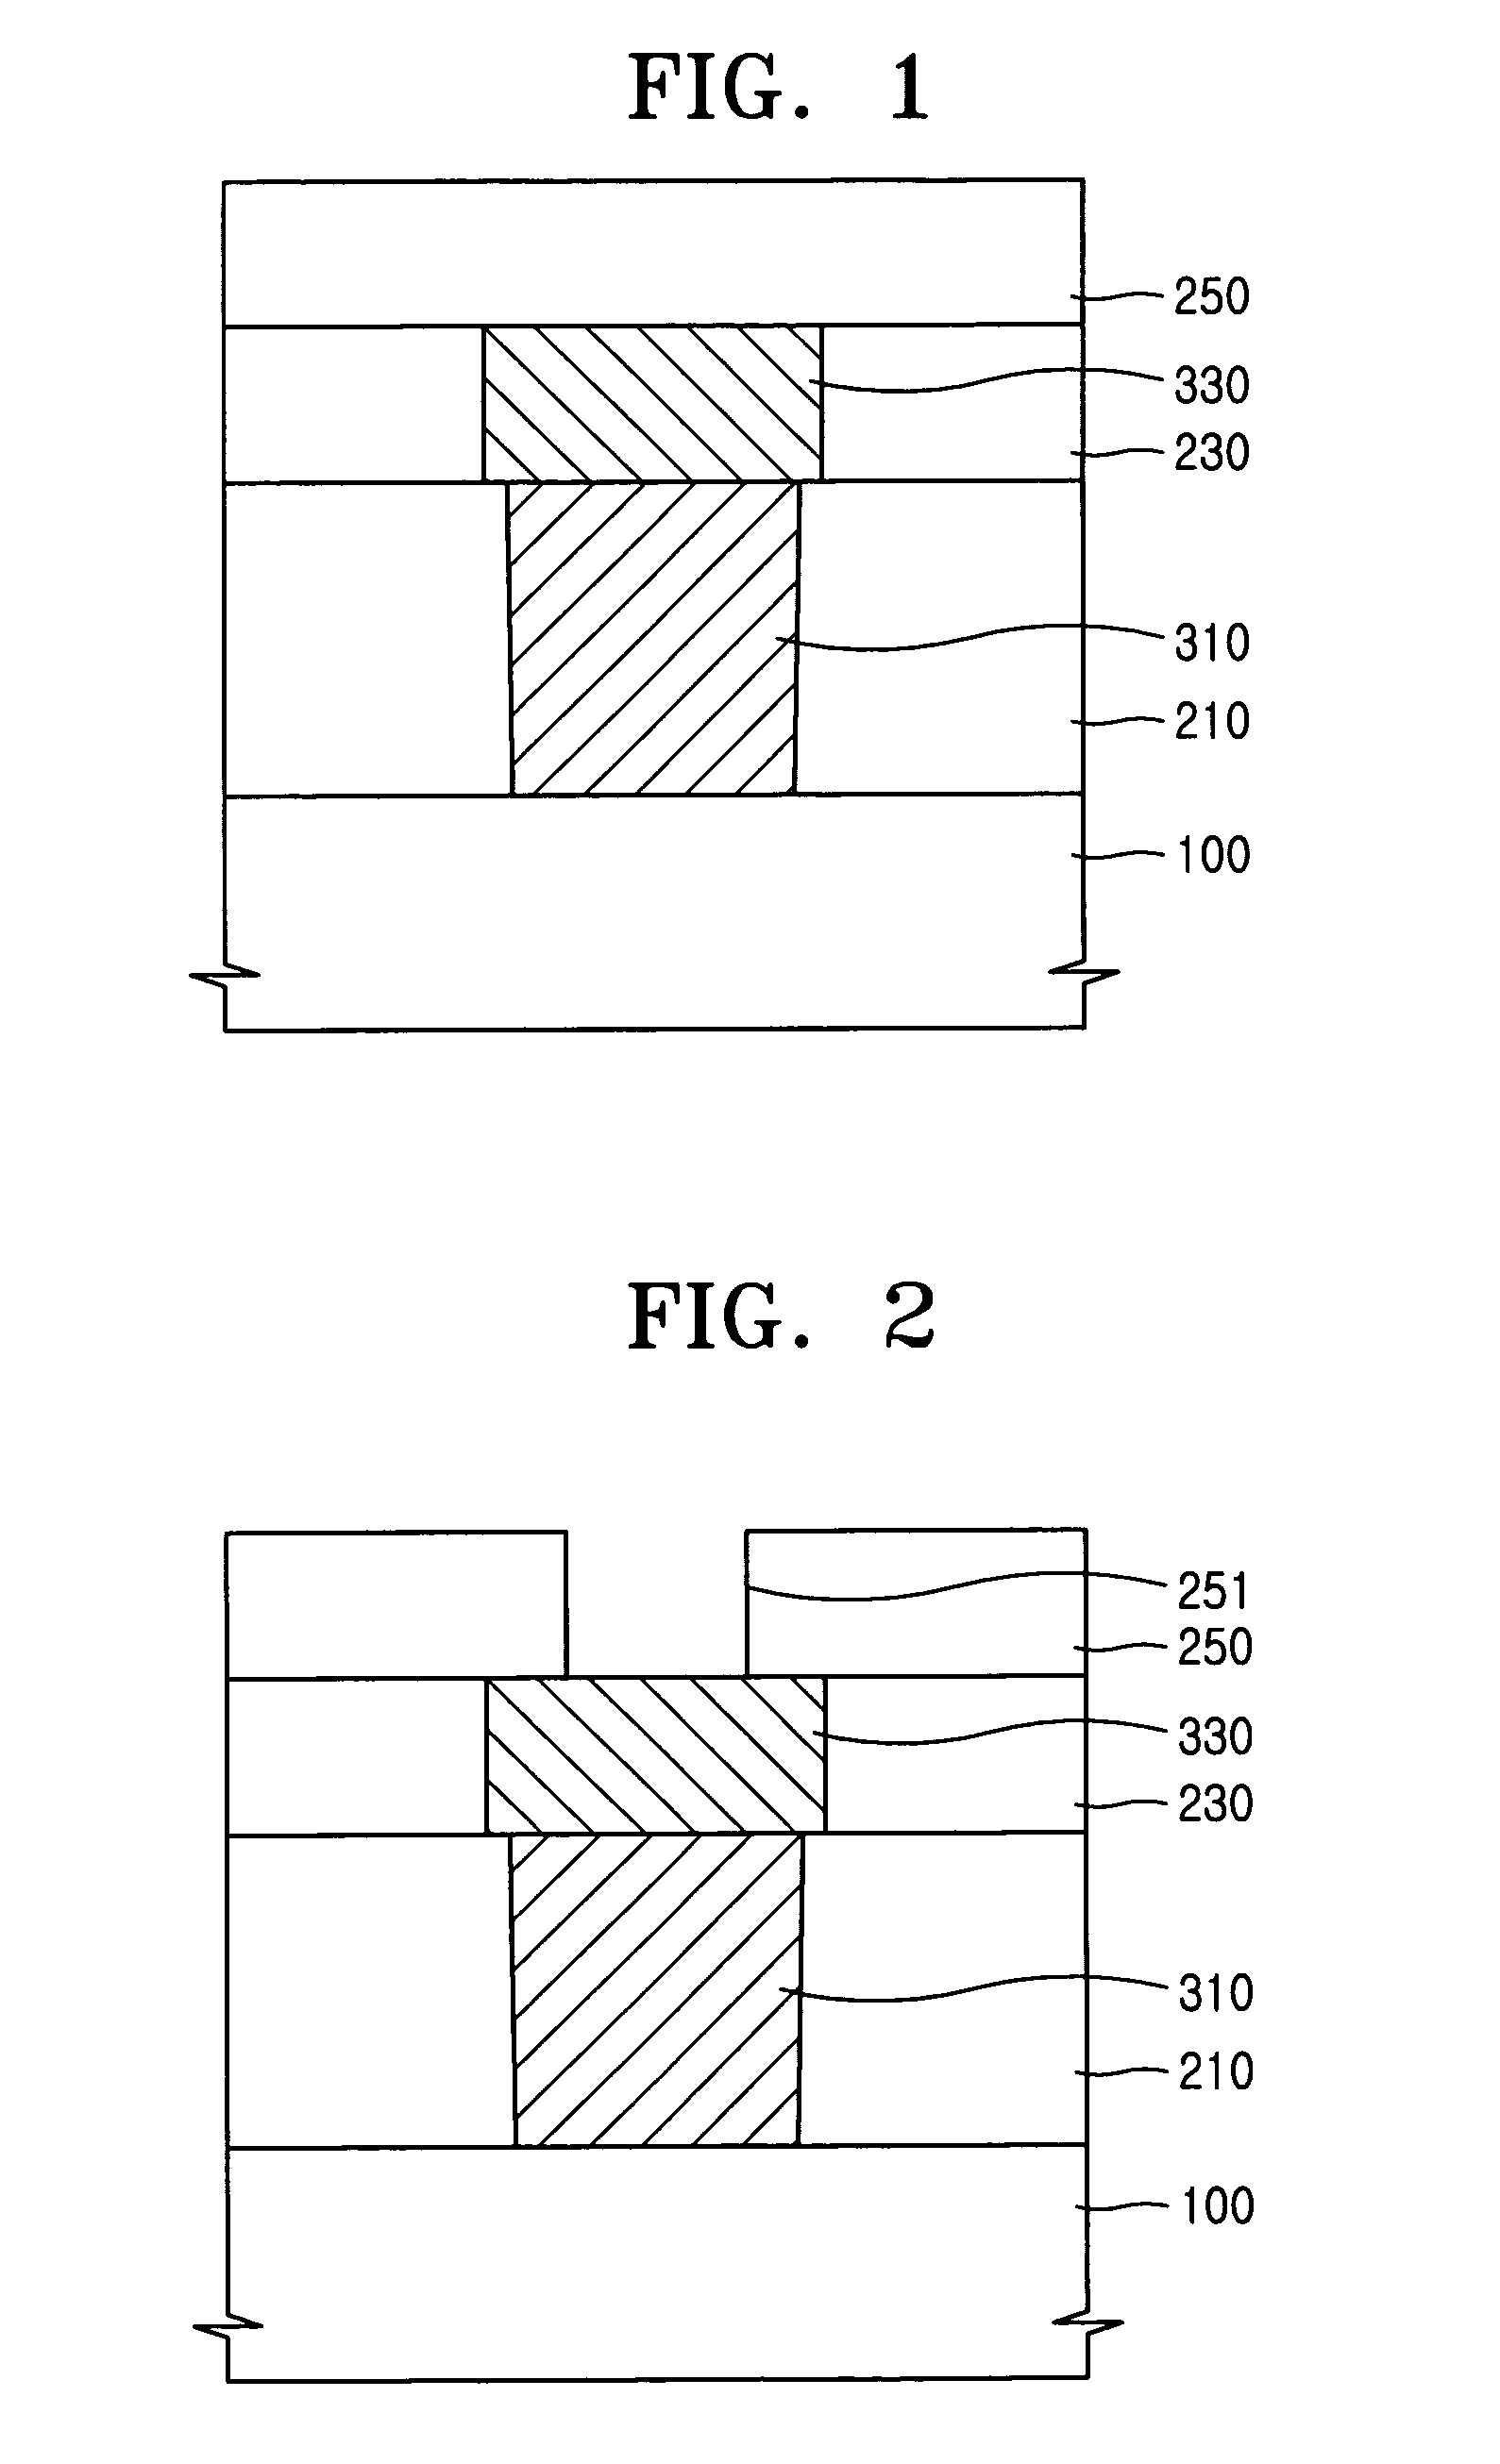 Phase change memory elements and methods of fabricating phase change memory elements having a confined portion of phase change material on a recessed contact